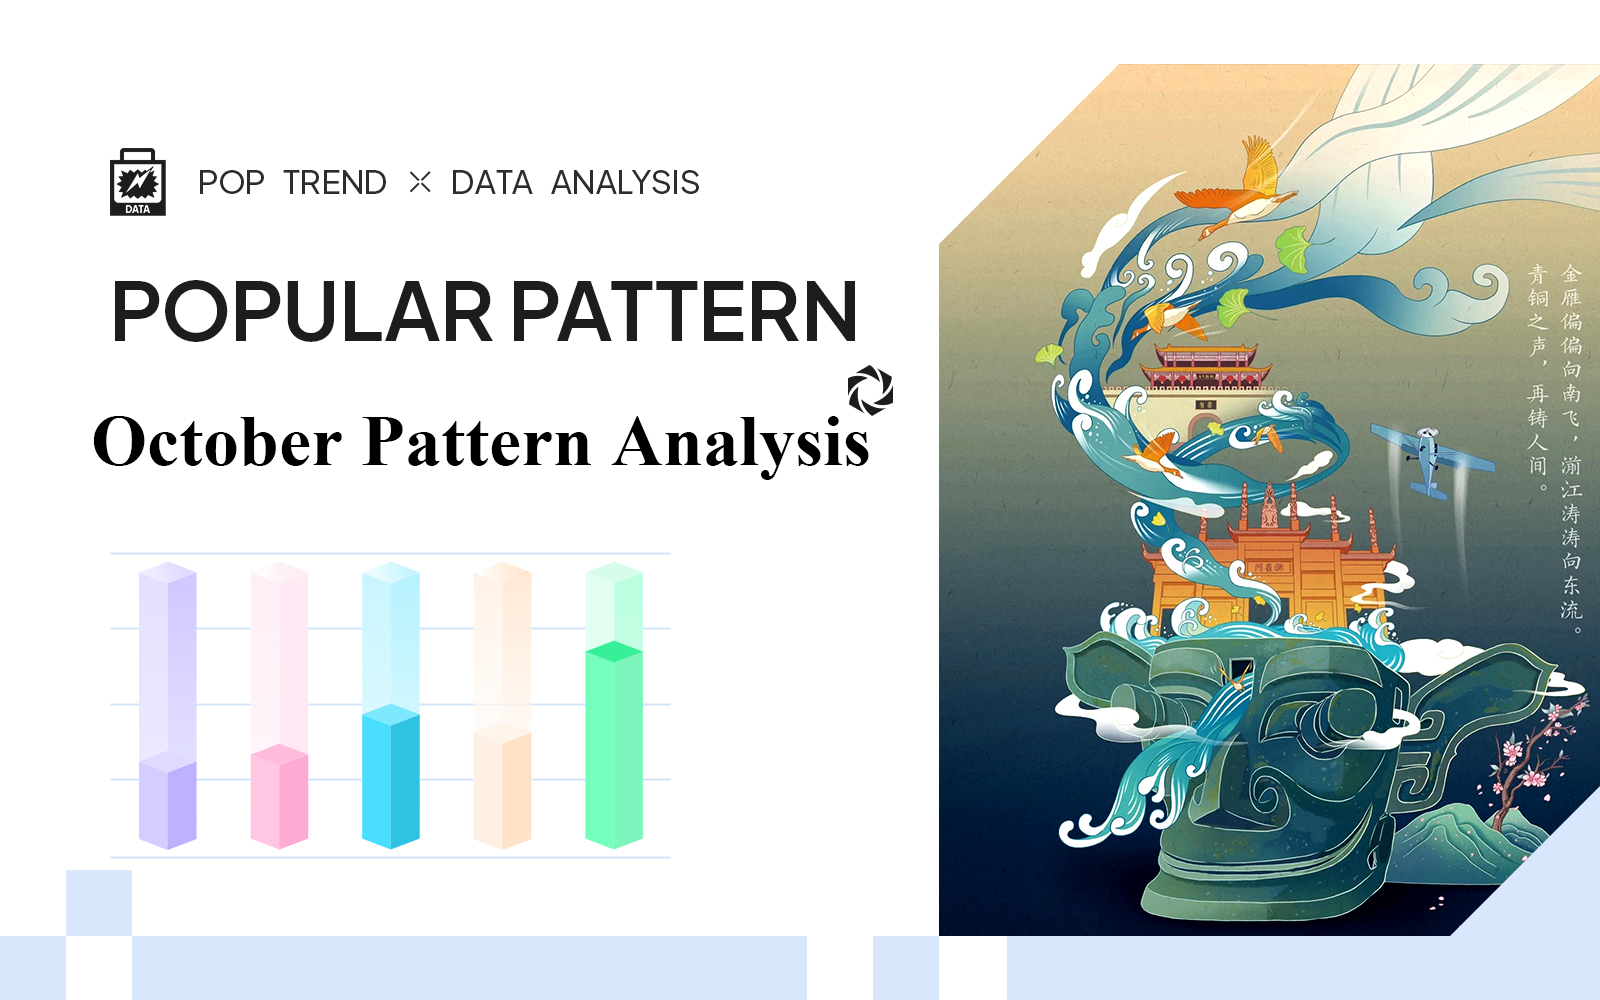 The Analysis of Popular Pattern in October